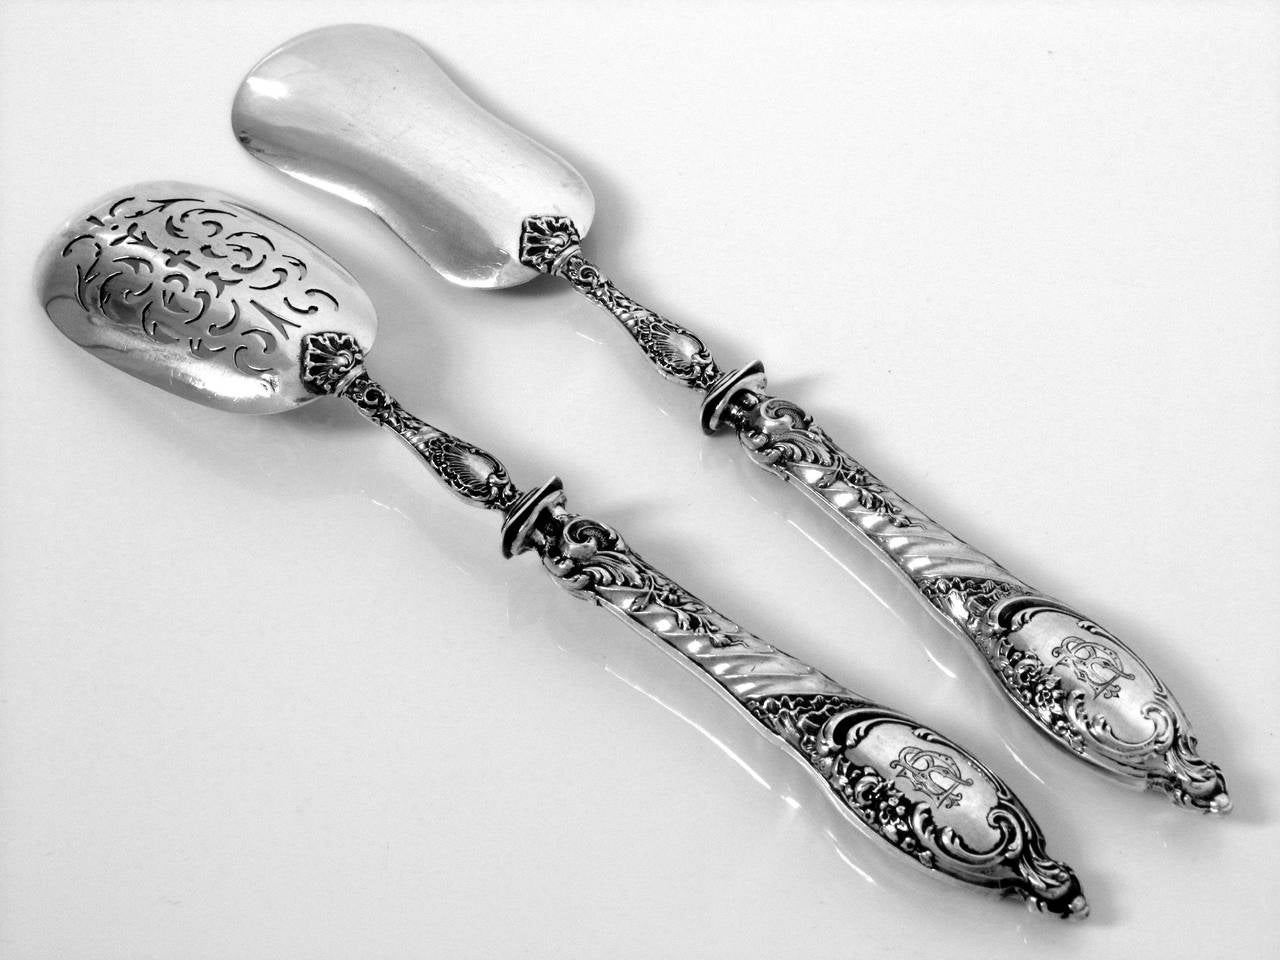 Puiforcat French All Sterling Silver Dessert Hors d'Oeuvre Set 4 pc Rococo For Sale 1